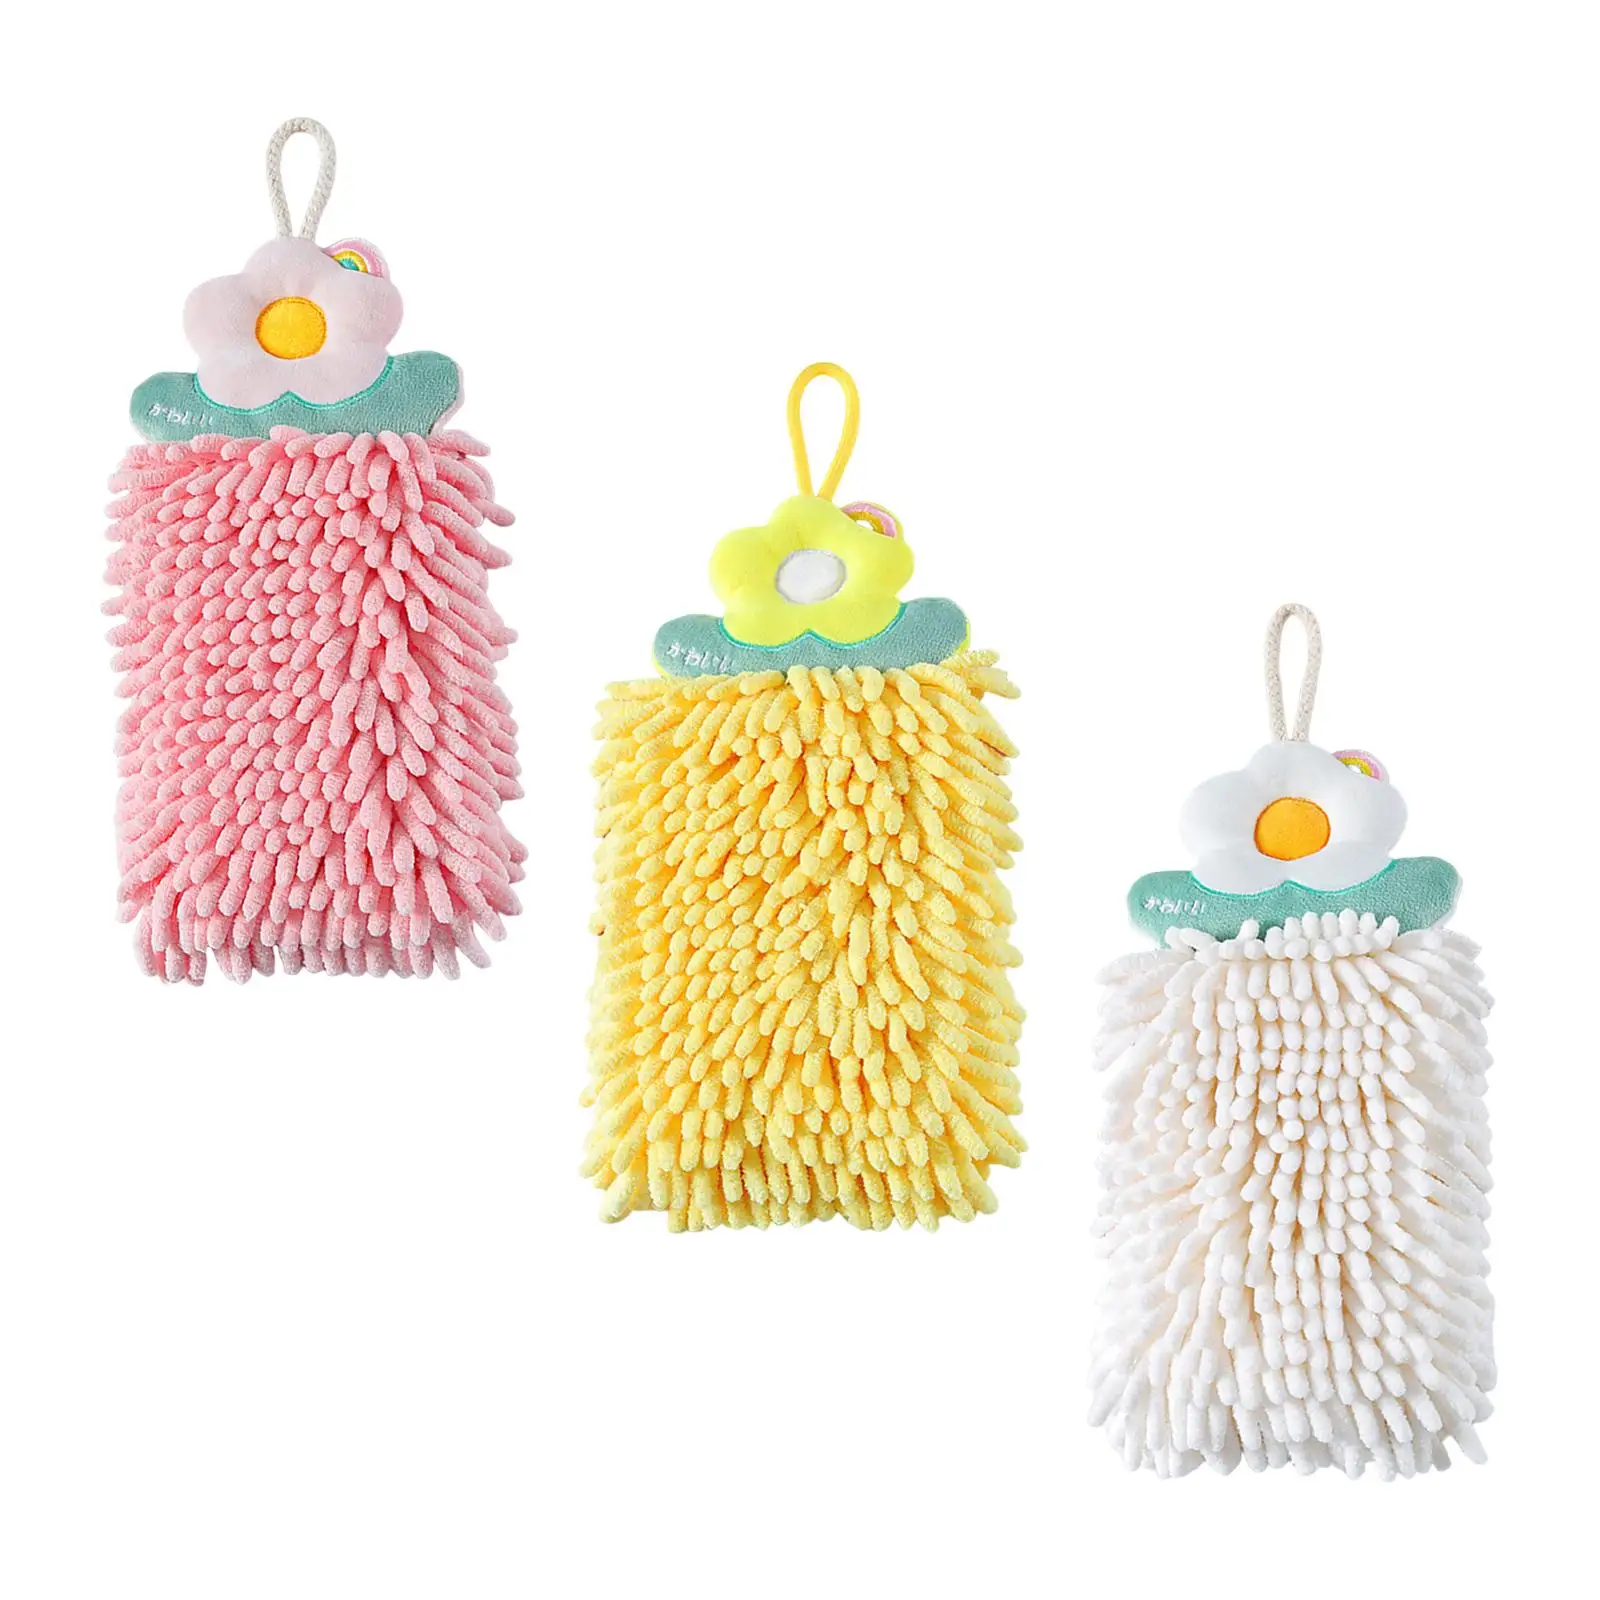 Hanging Hand Towels Highly Absorbent Decorative Thick Hanging Kitchen Towels